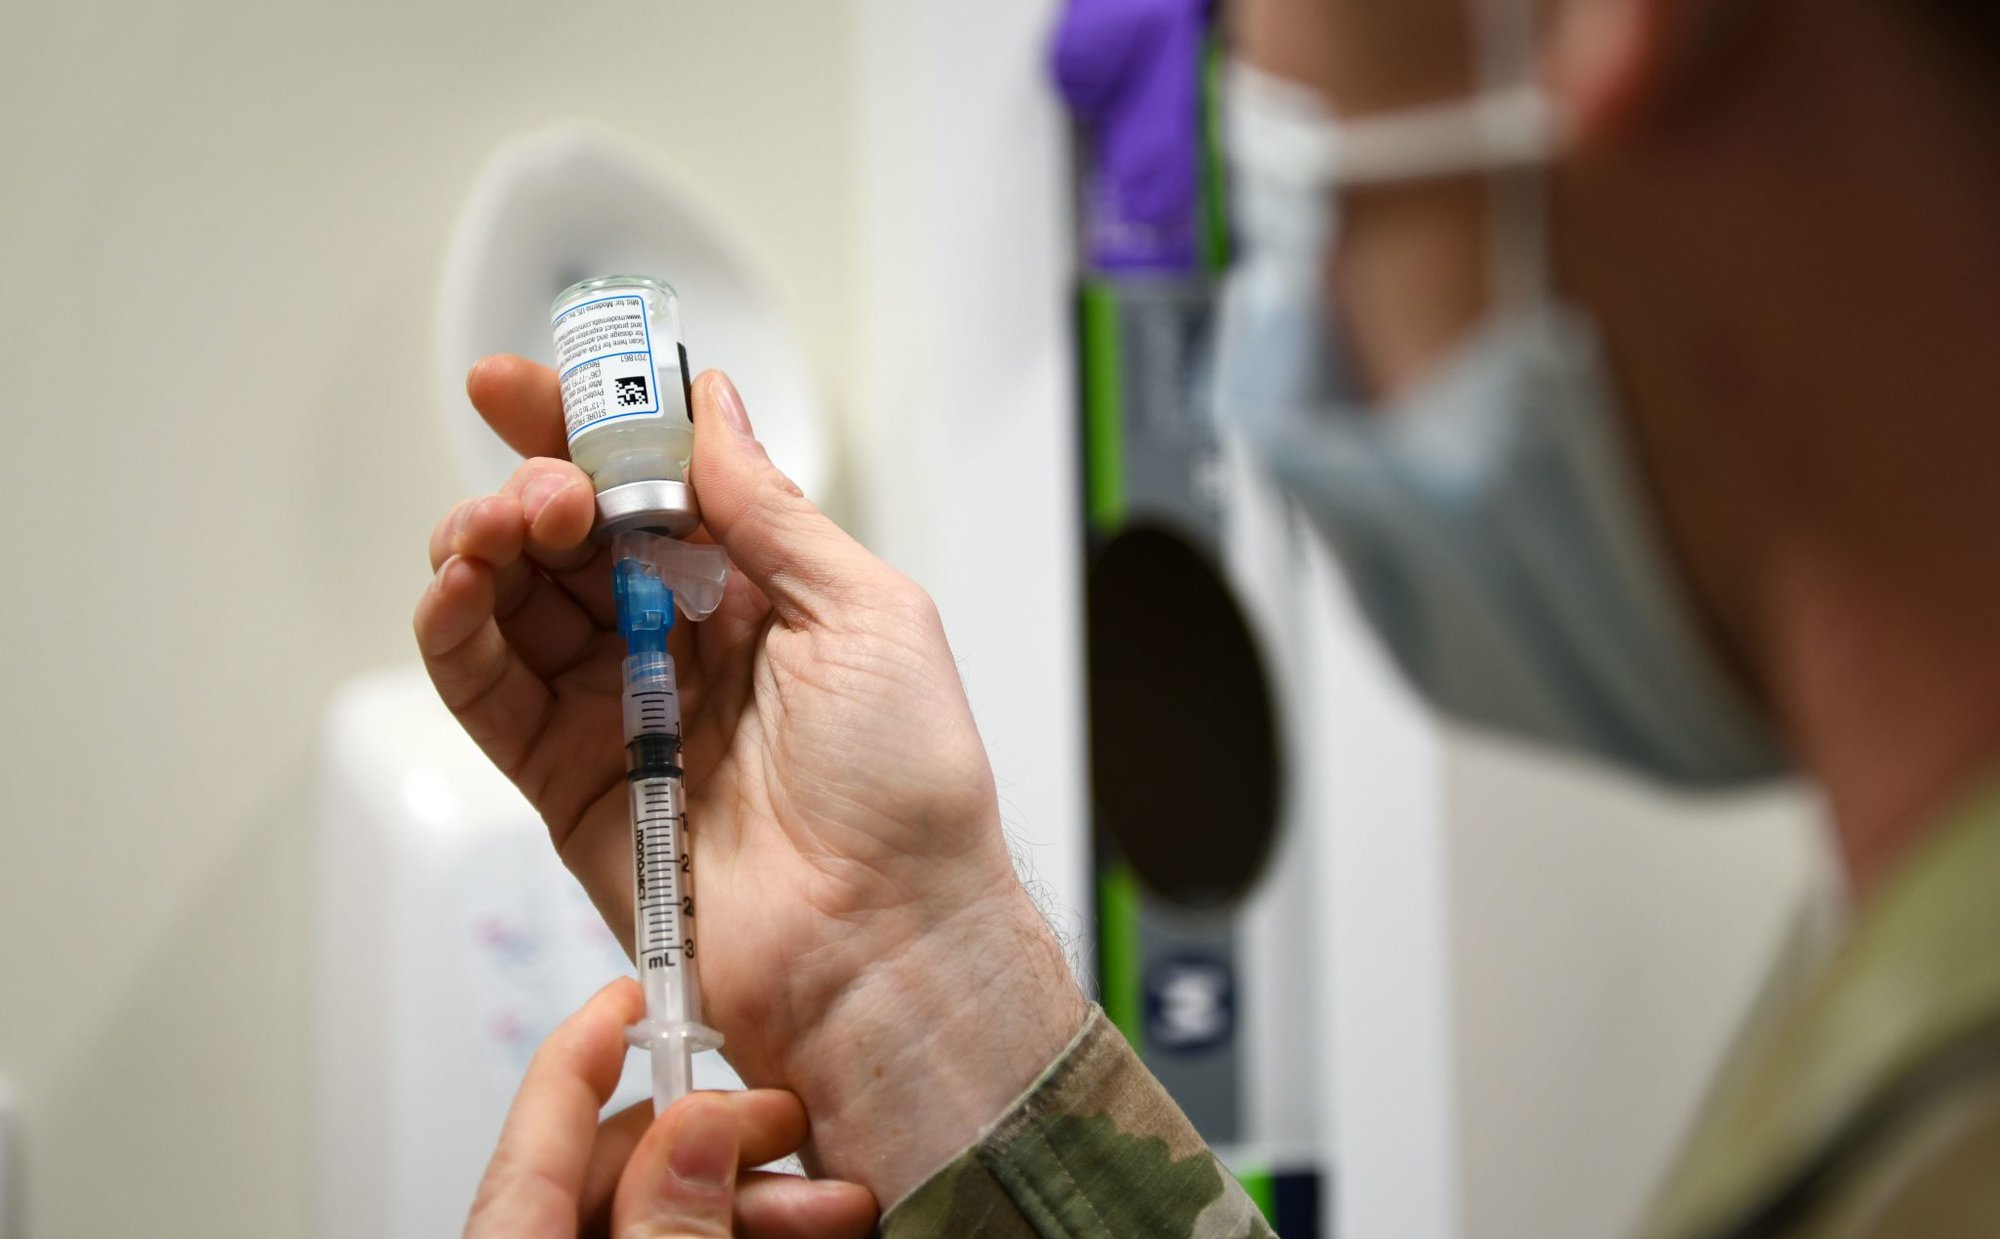 Technical Sgt. Justin Pribble, 48th Medical Group pediatrics/immunology flight chief, draws a sample of the COVID-19 vaccine at Royal Air Force Lakenheath, England, Dec. 29, 2020. Pribble was the technician responsible for administering the first COVID-19 vaccines at the 48th Fighter Wing.(U.S. Air Force photo by Senior Airman Madeline Herzog)